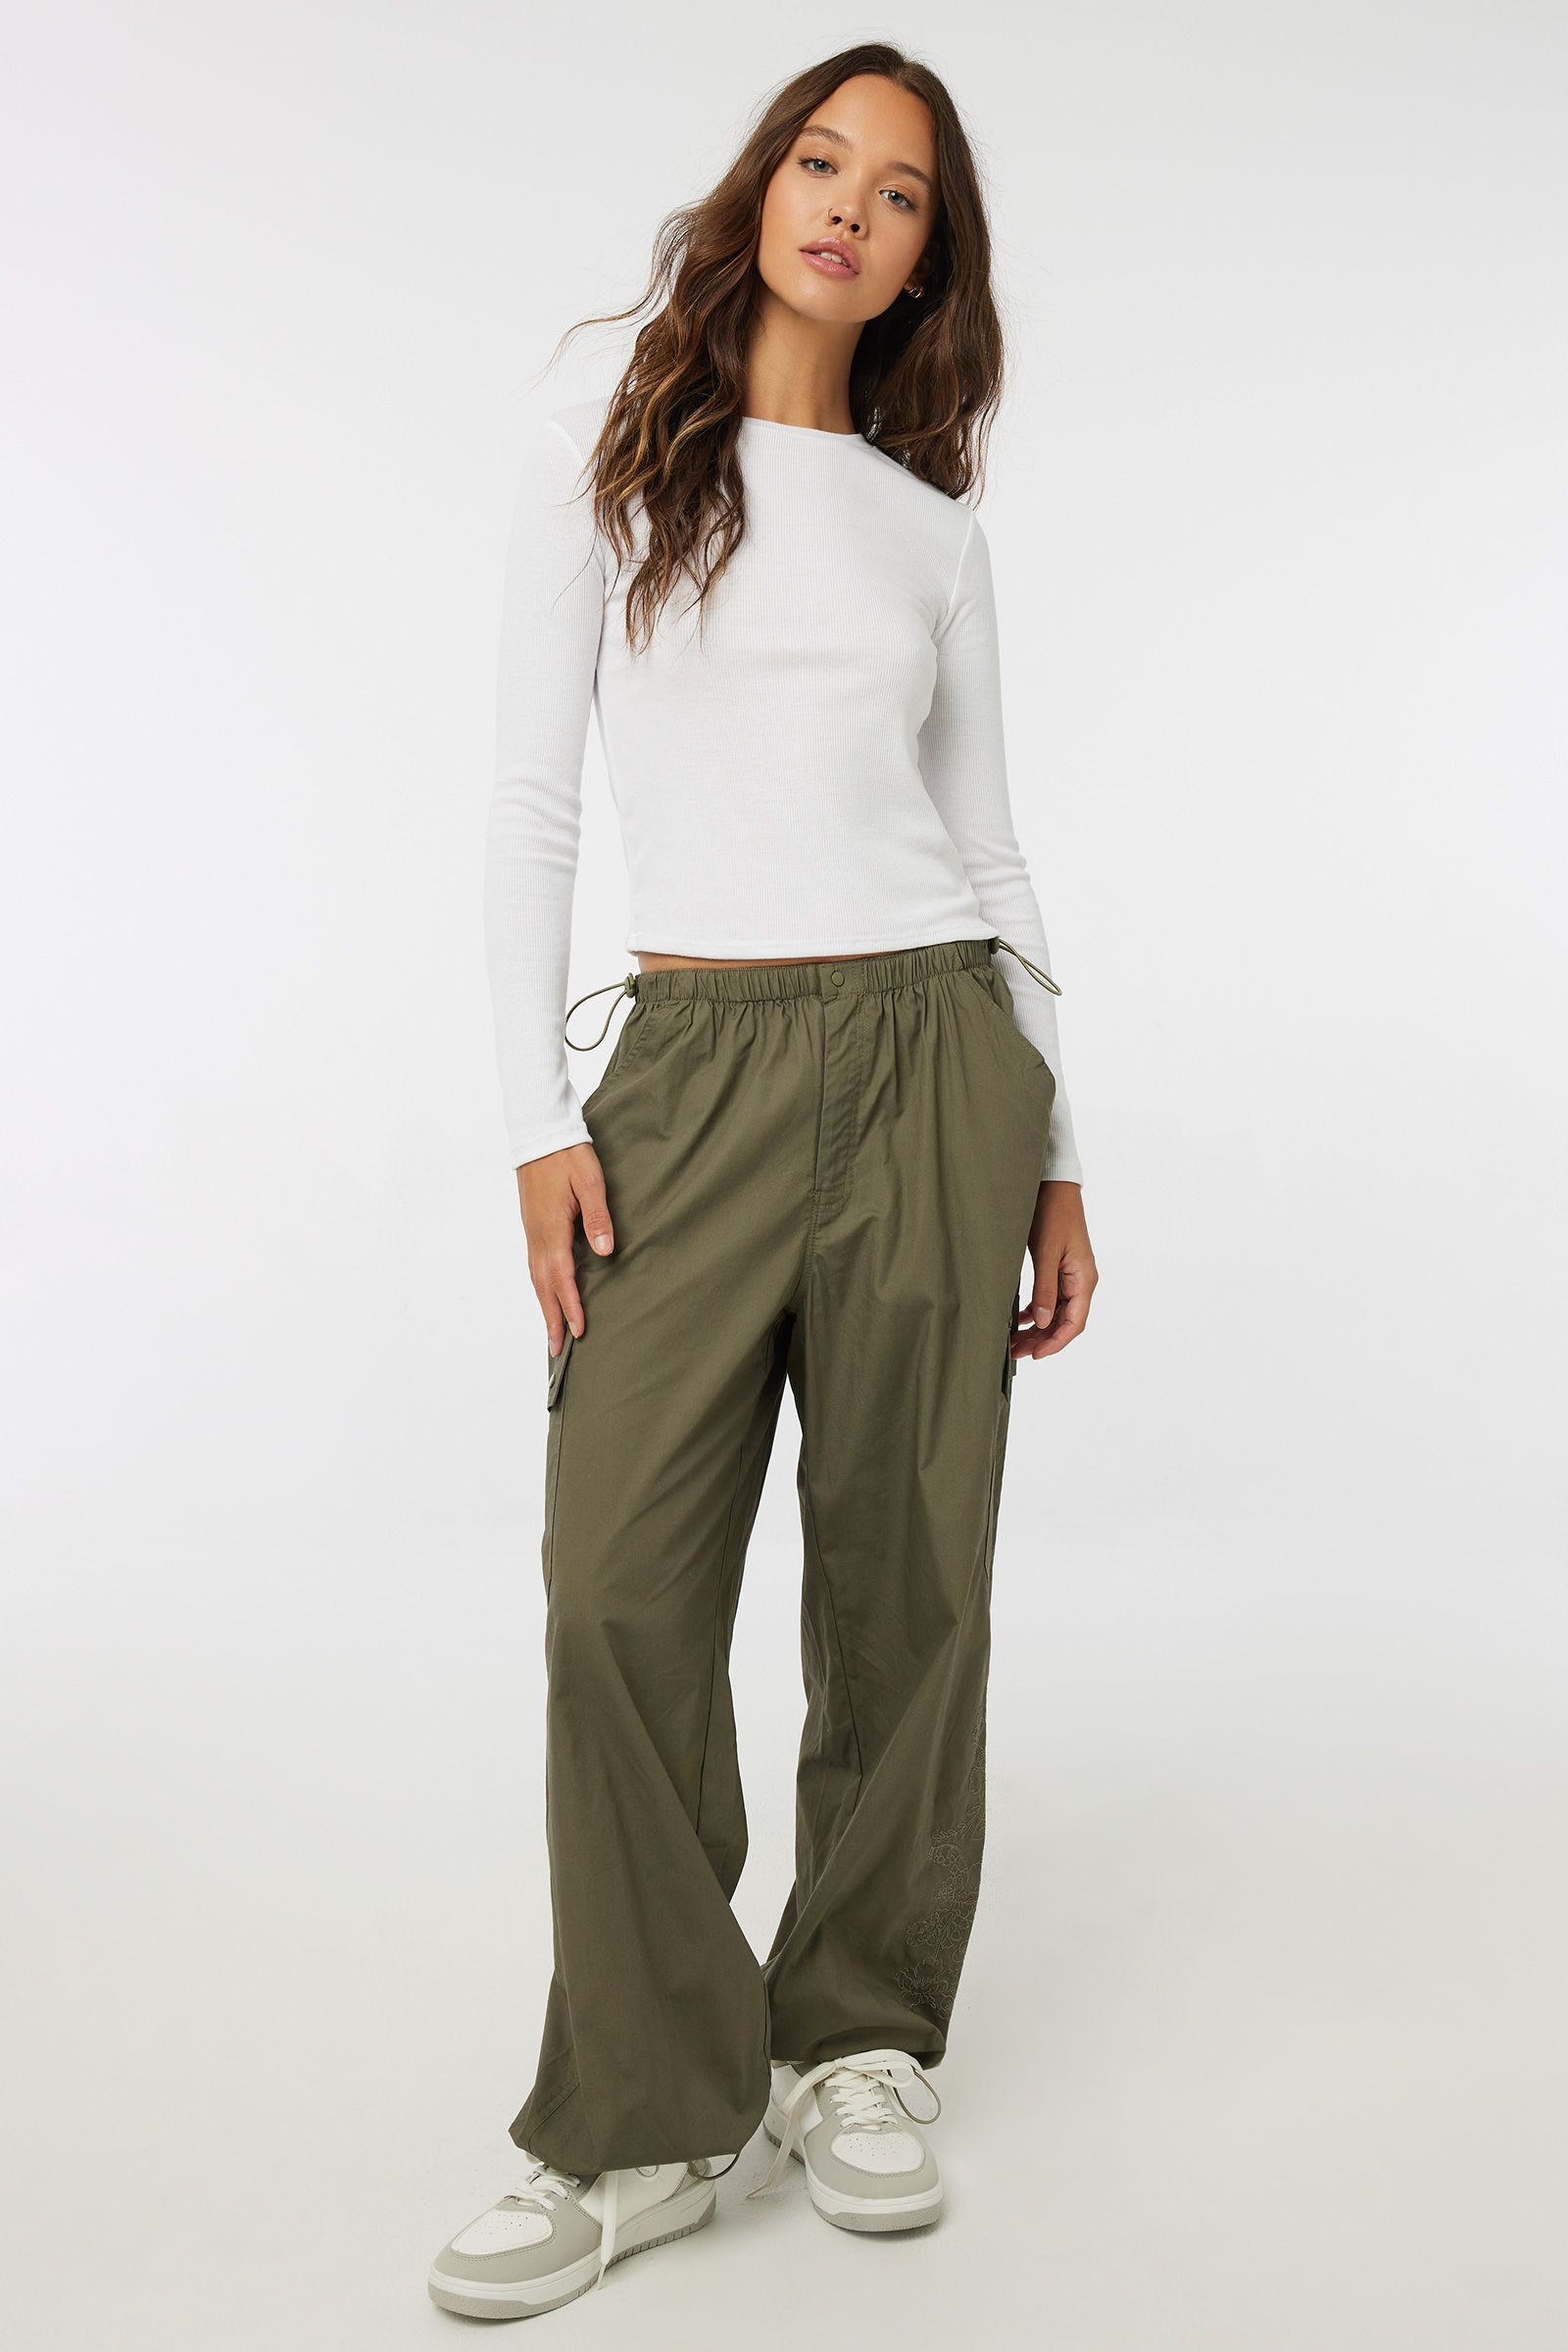 Ardene Parachute Pants with Embroidery Detail in Khaki | Size | 100% Cotton